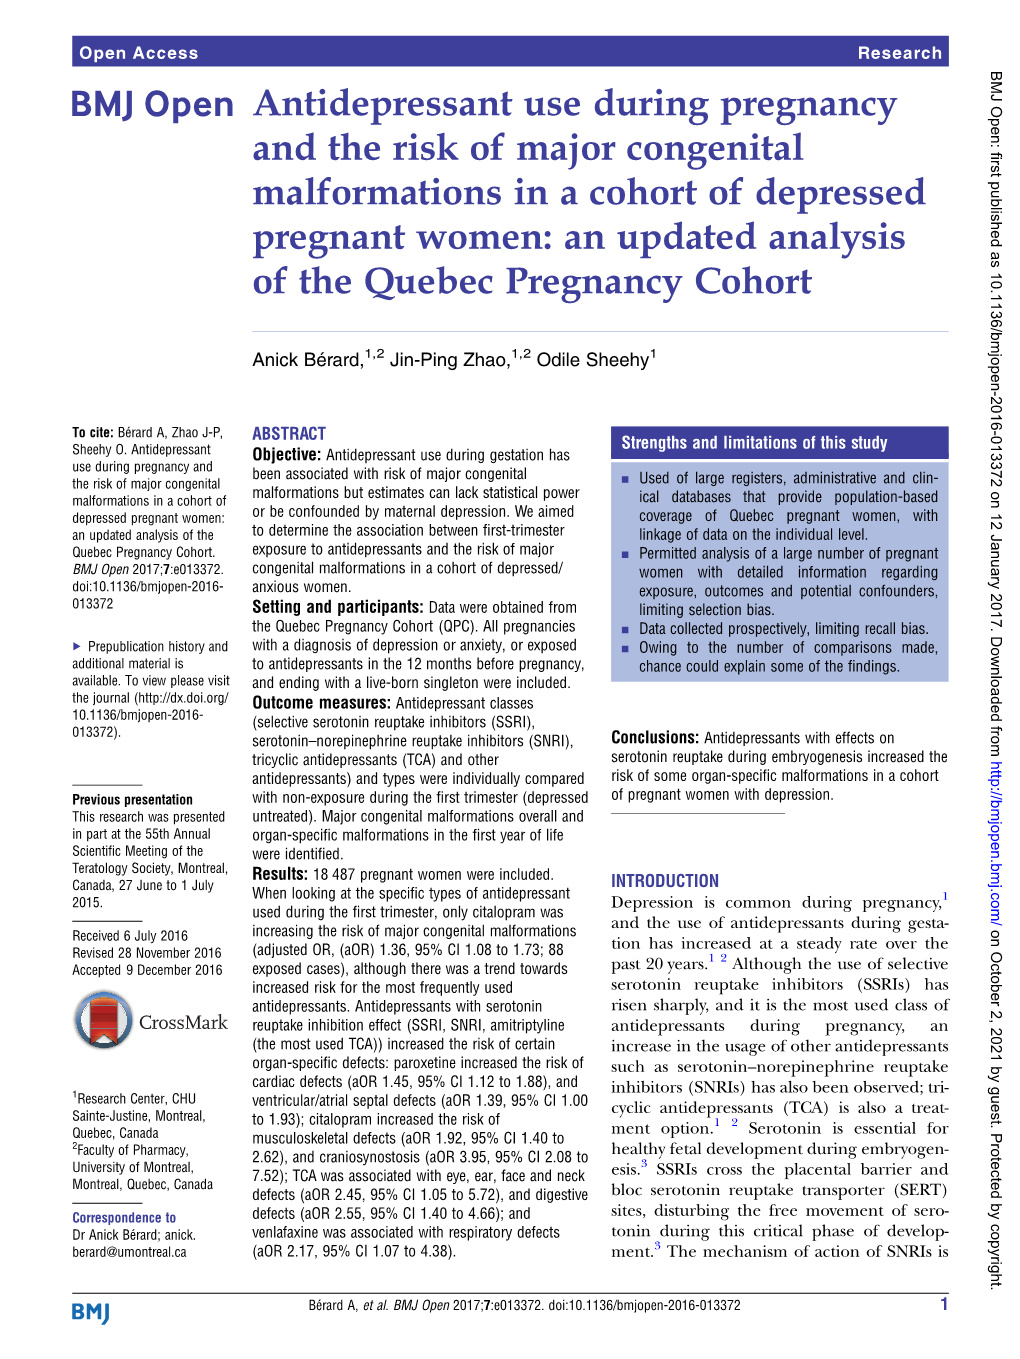 Antidepressant Use During Pregnancy and the Risk of Major Congenital Malformations in a Cohort of Depressed Pregnant Women